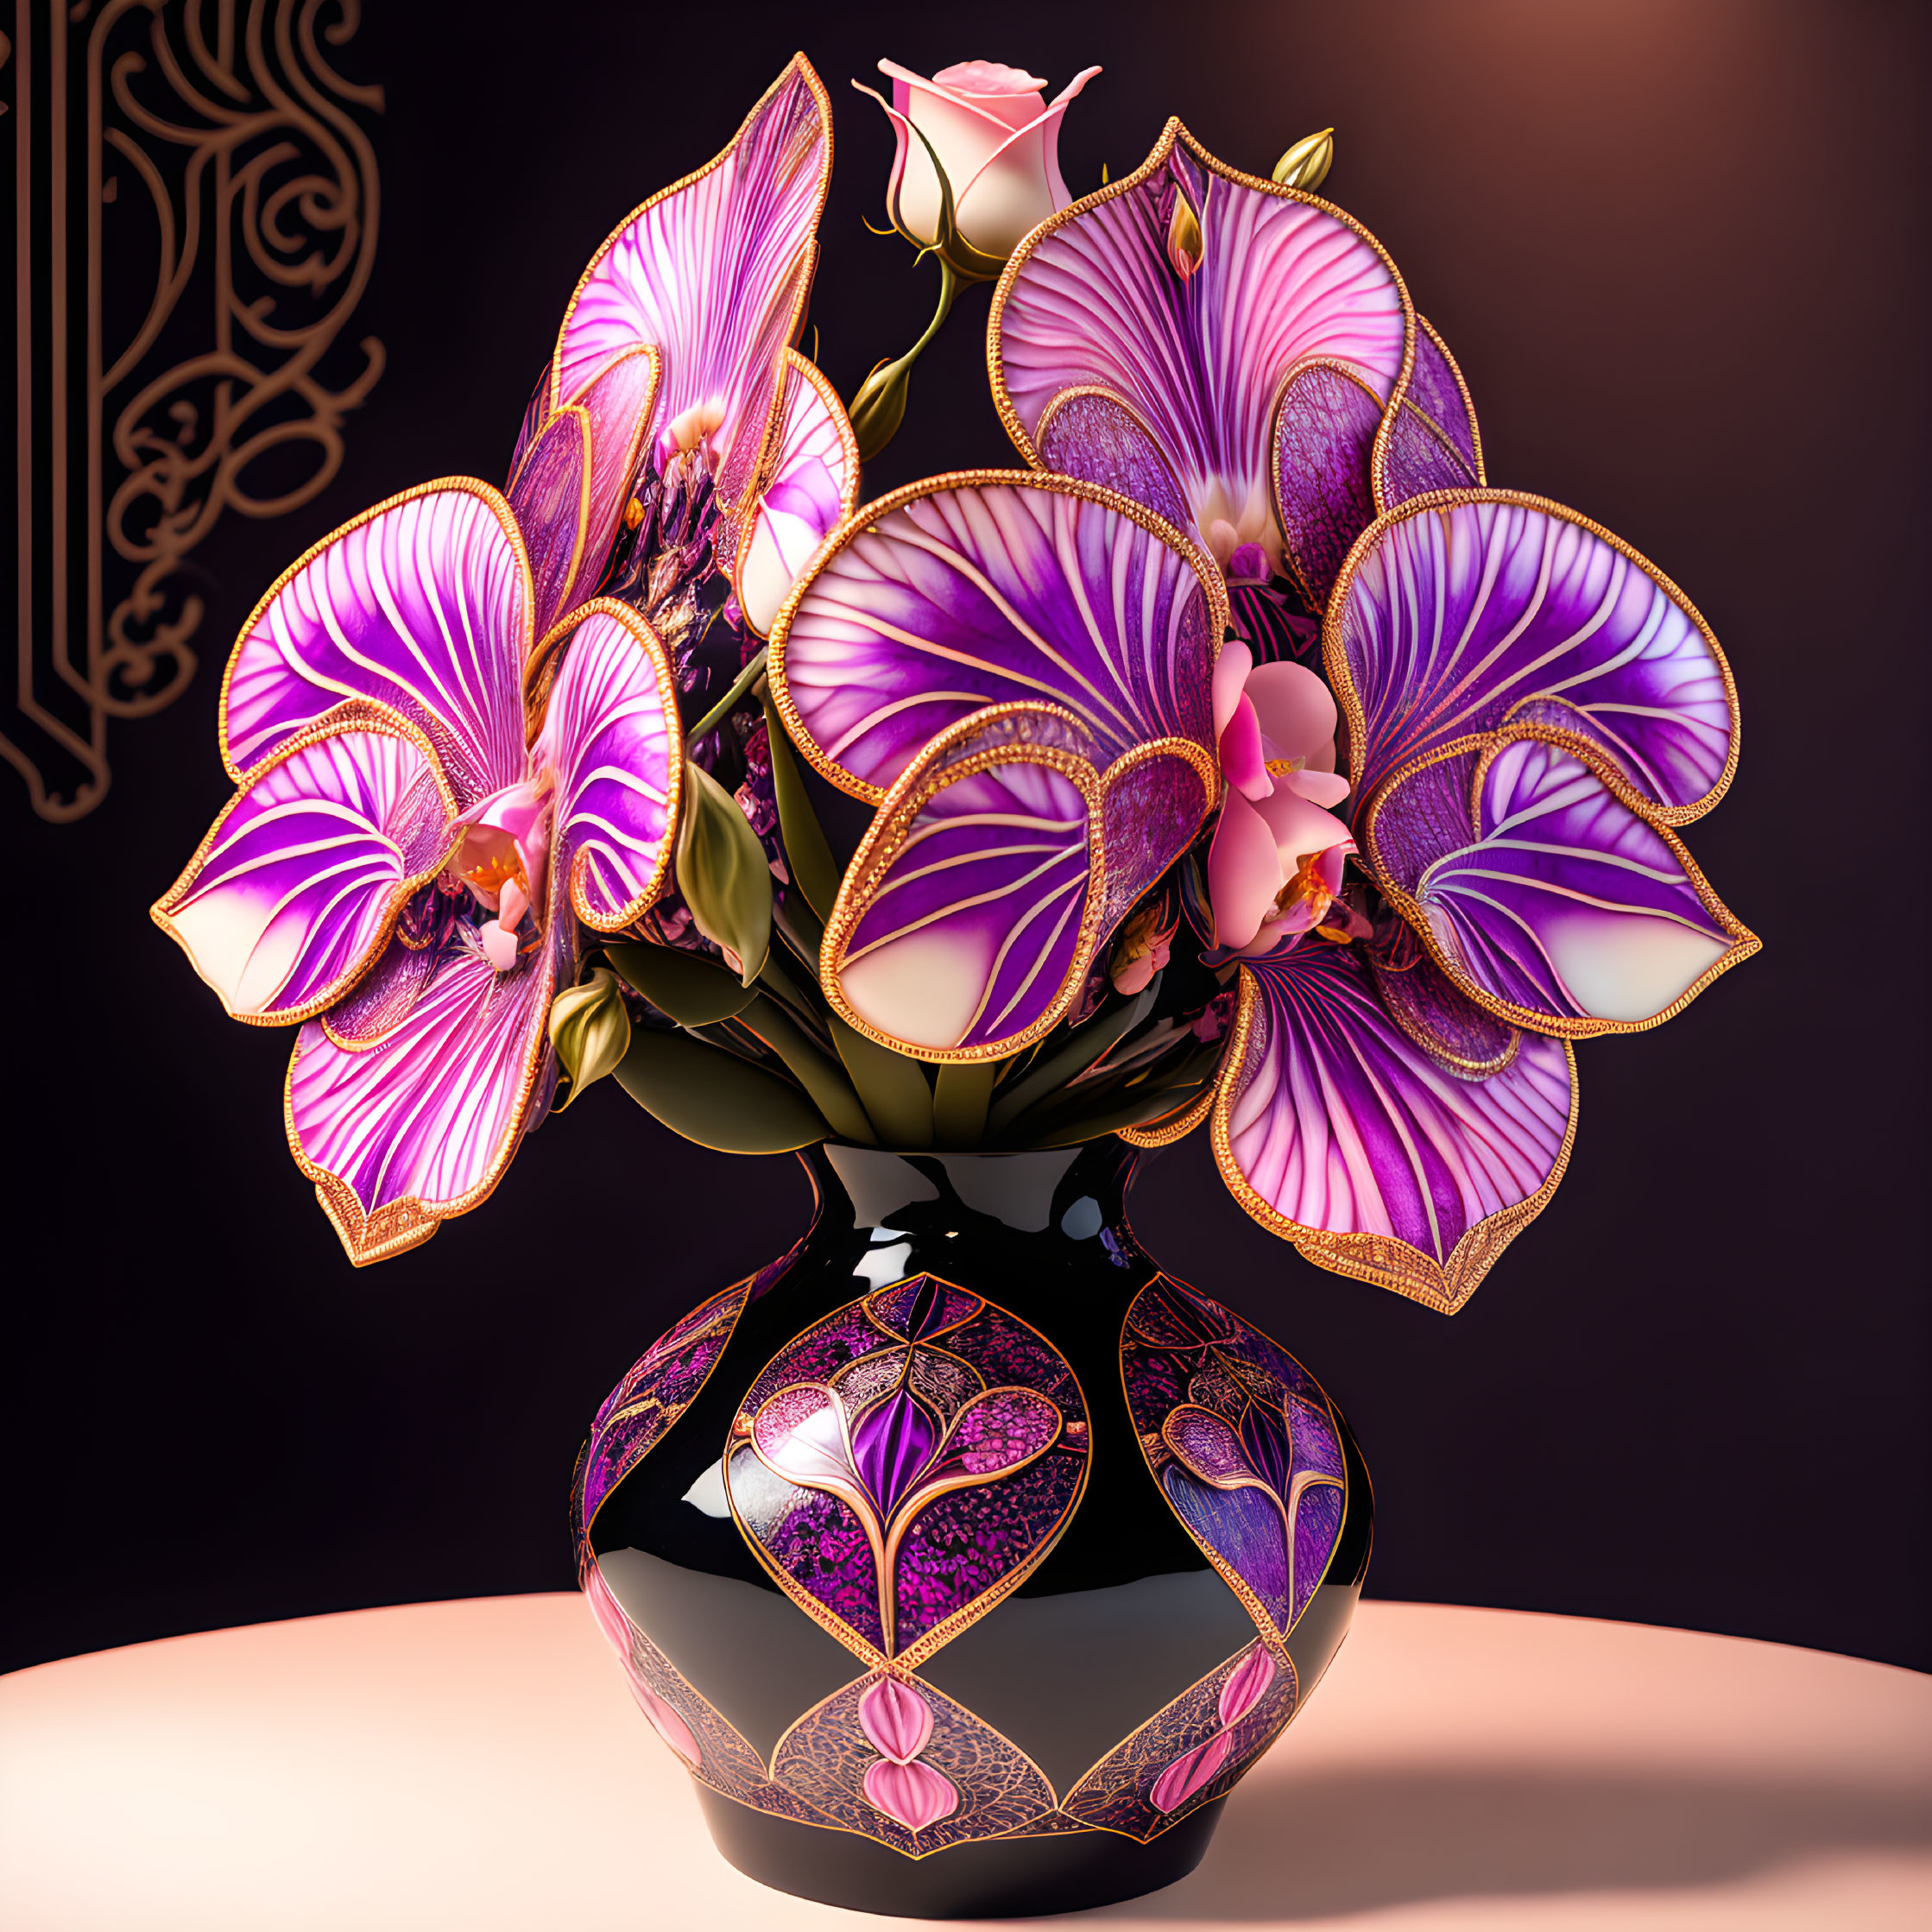 Black vase with gold and pink patterns, vibrant orchids on dark background